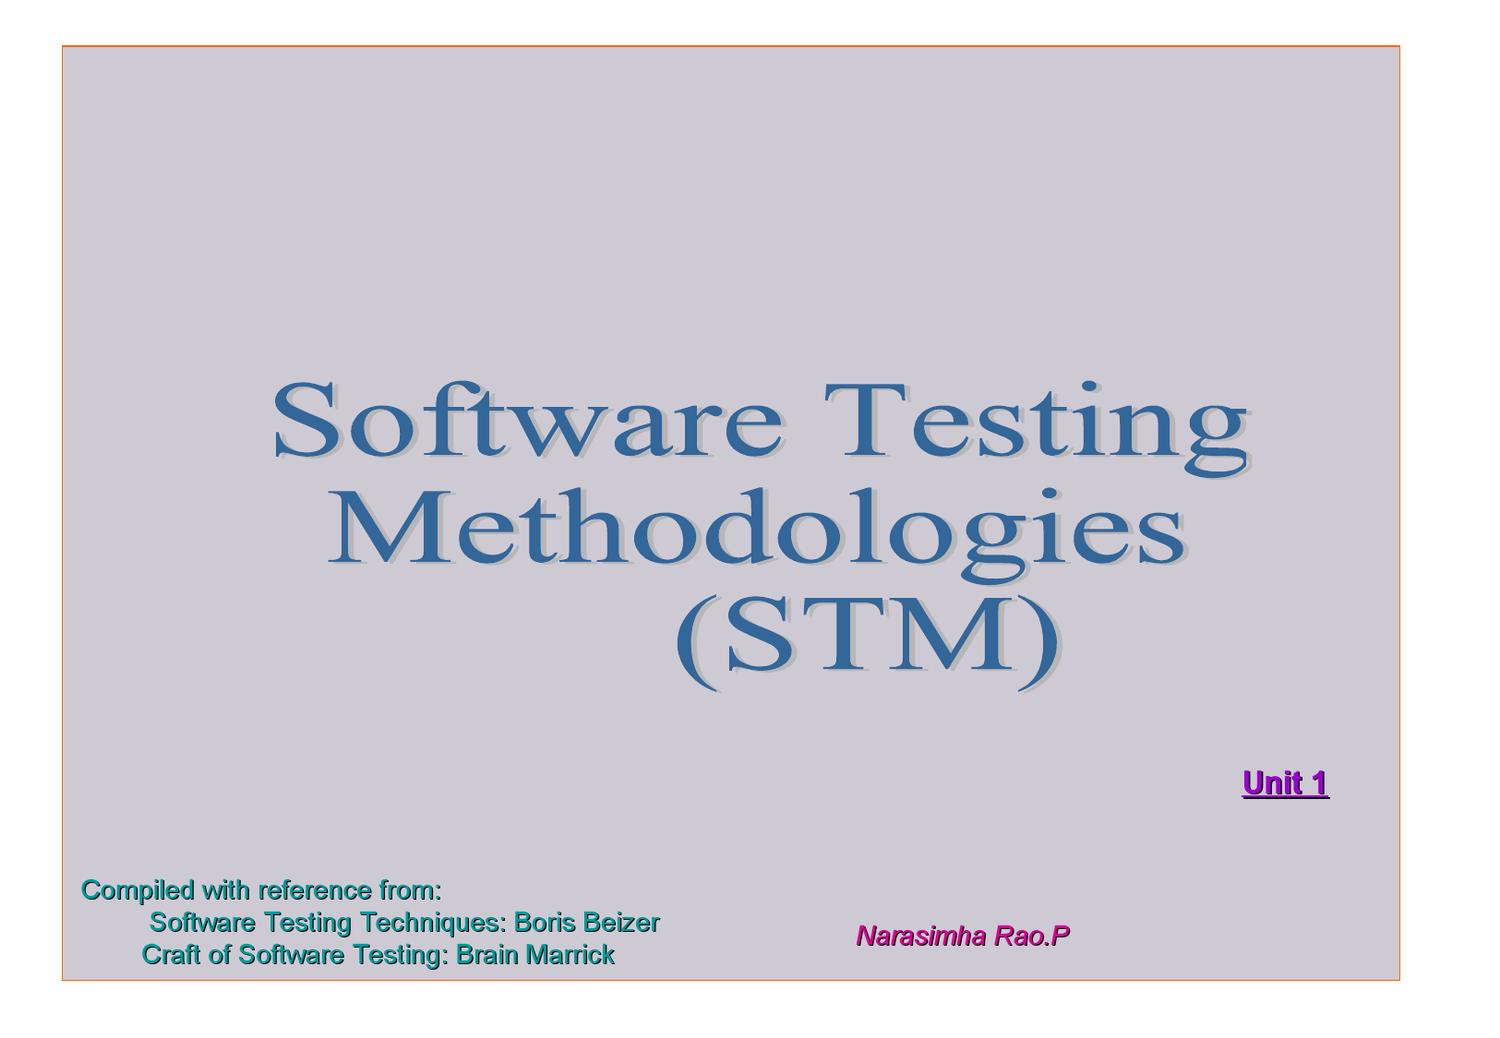 software testing techniques by boris beizer pdf free download